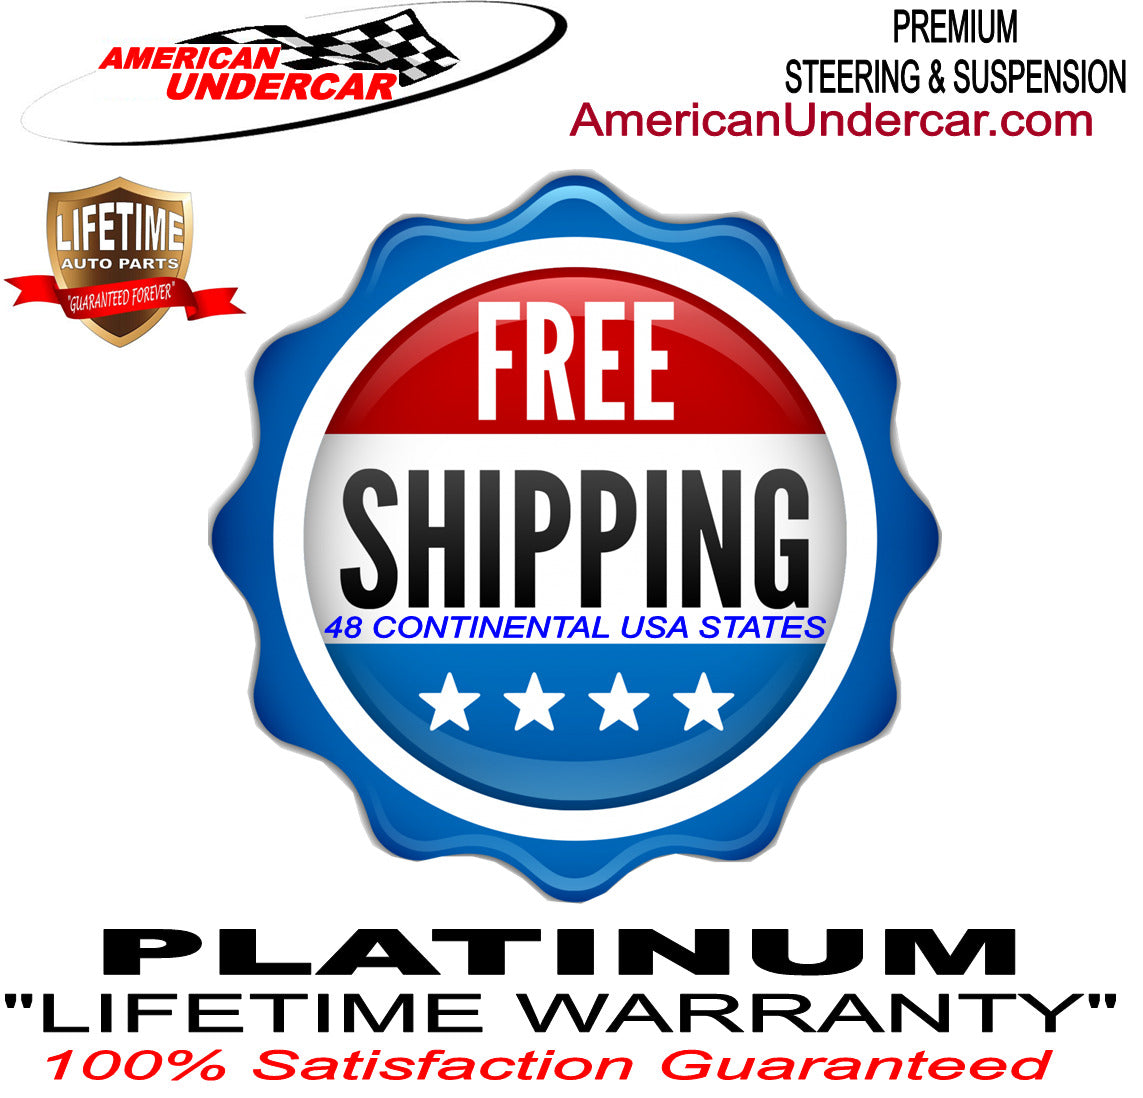 Lifetime Steering and Suspension Kit for 2001-2010 Chevrolet Silverado 3500HD 2WD